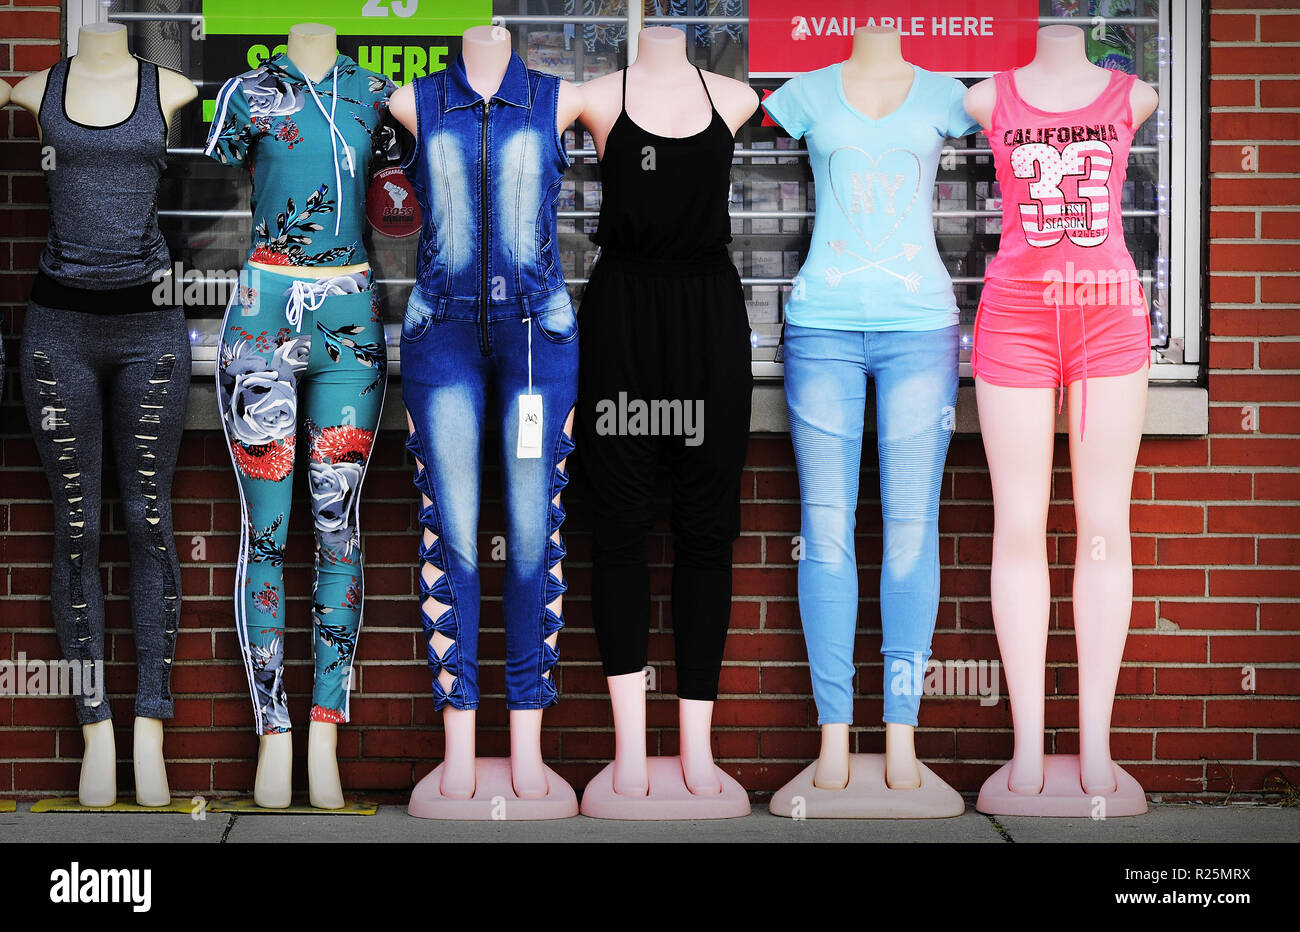 Clothing for young women on mannequins displayed outside a store. Stock Photo